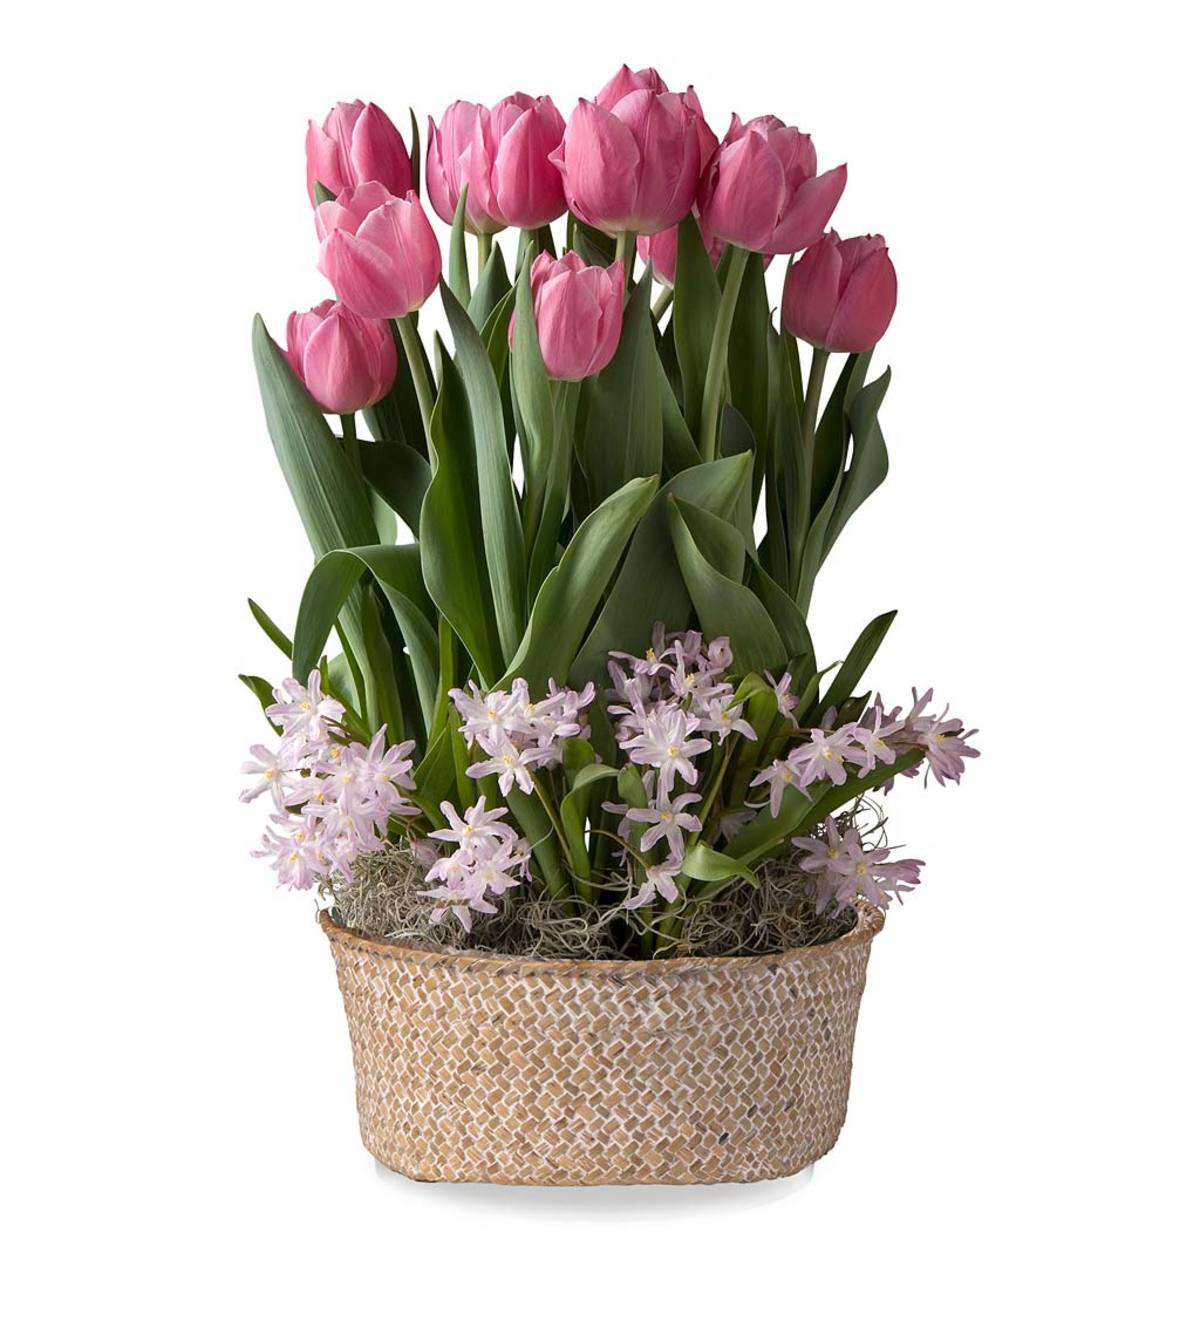 April Early Glory Tulips & Pink Giant Glory-of-the-Snow Delivery in Seagrass Basket